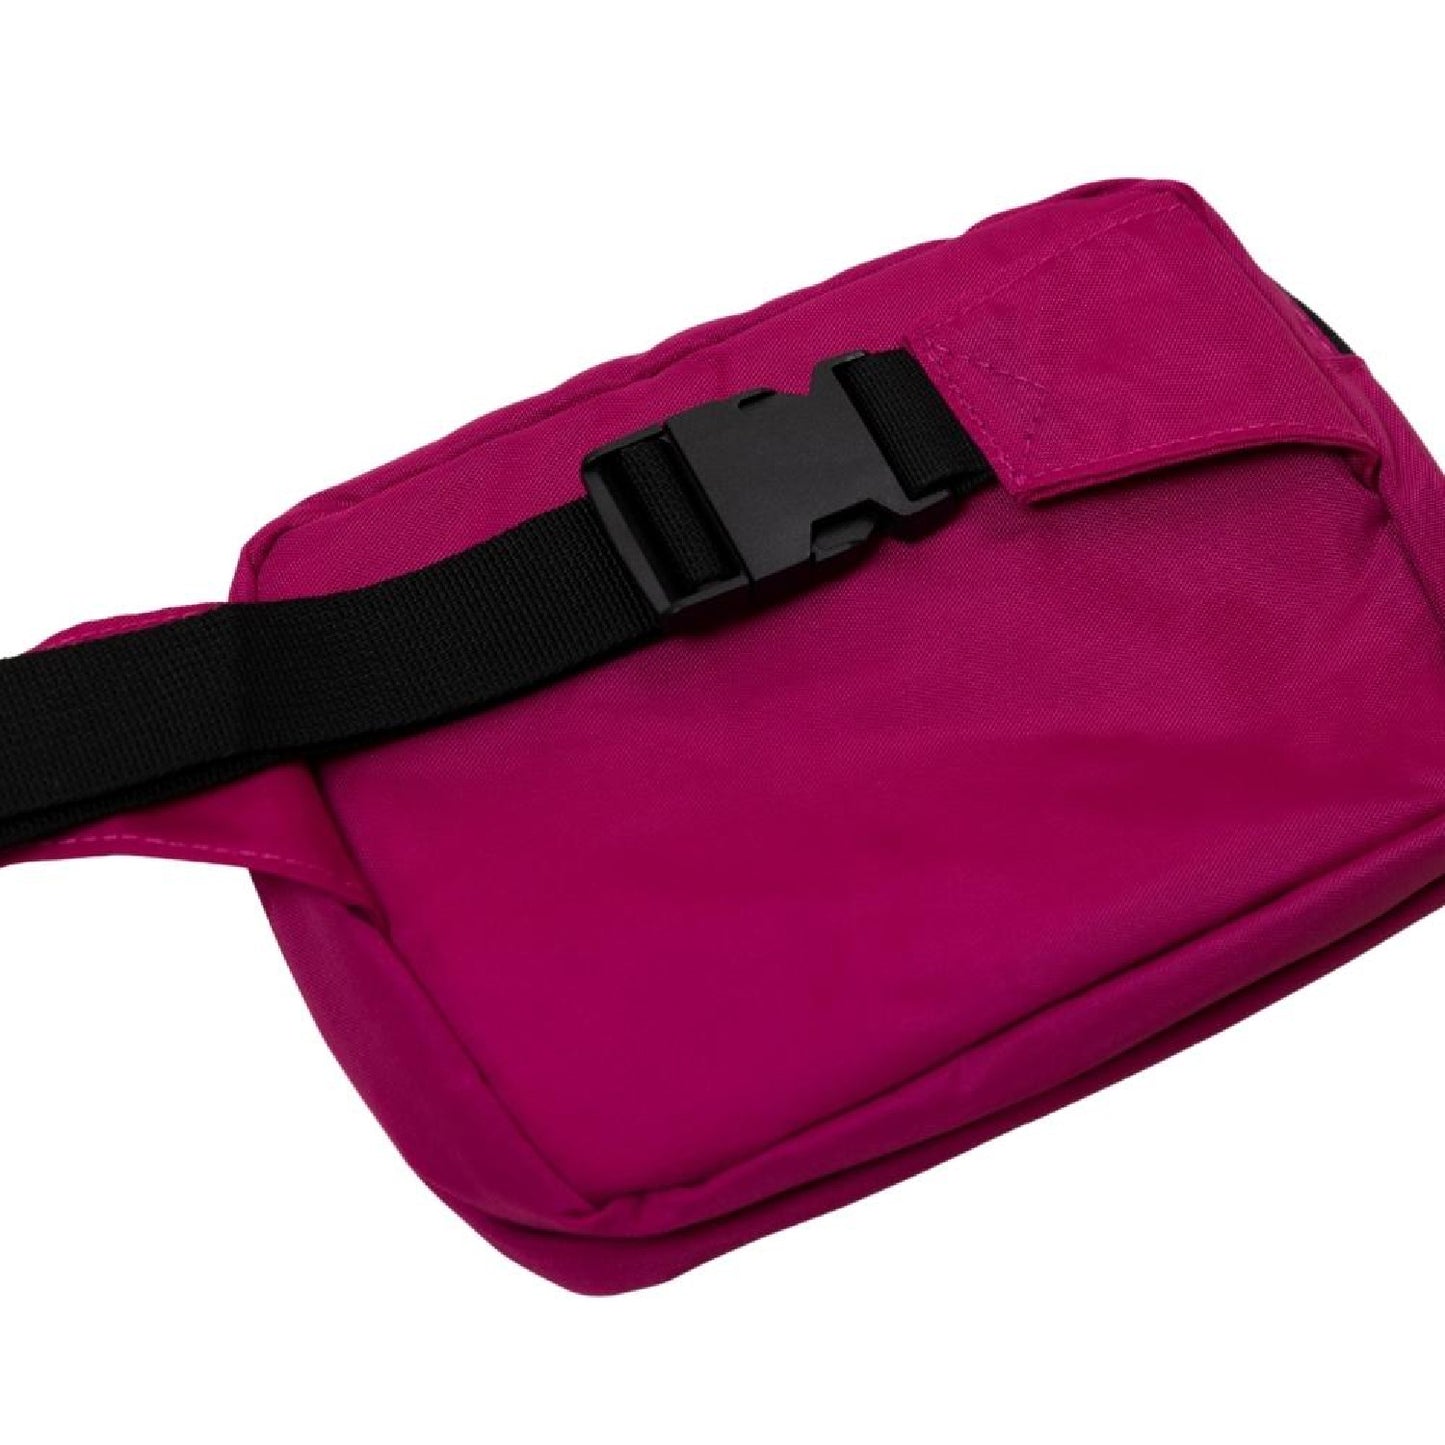 Everyday Fanny Pack by Keep Nature Wild